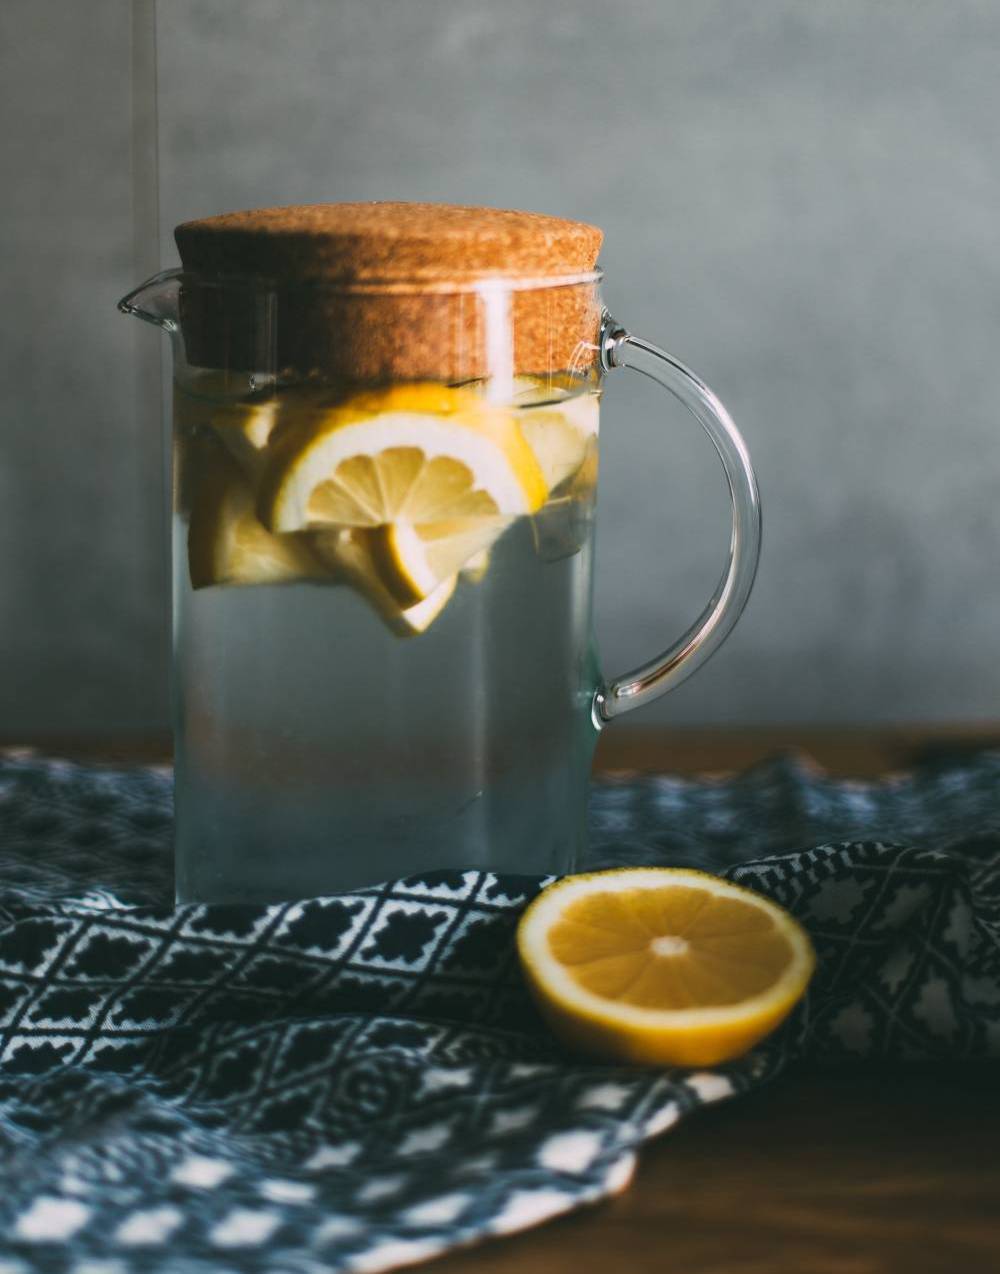 Clear pitcher on a table with water and sliced lemon in it. A half lemon sits at the base of the pitcher.